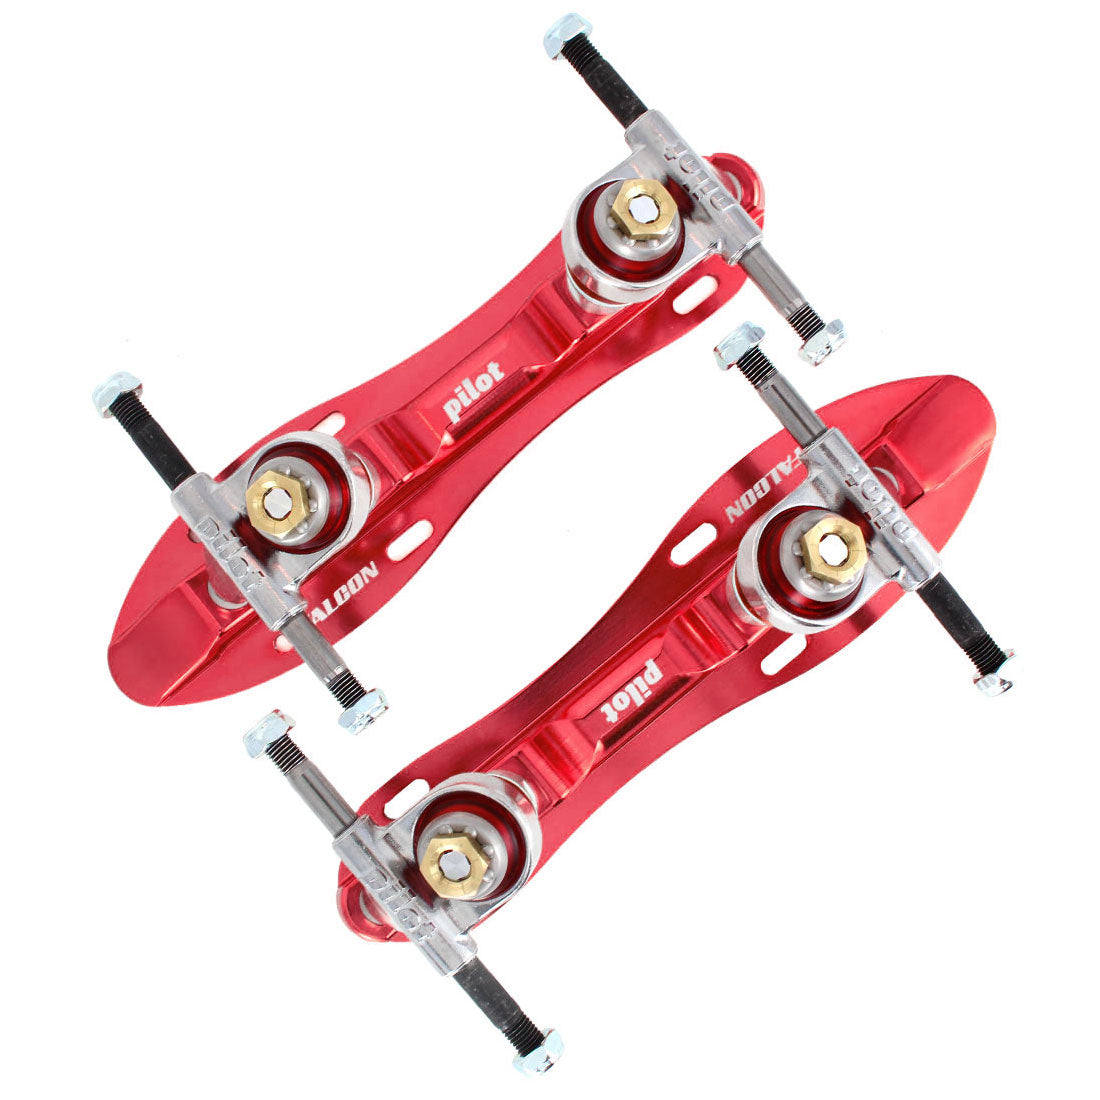 Pilot NTS Falcon 7.0 Plates - Red Roller Skate Plates